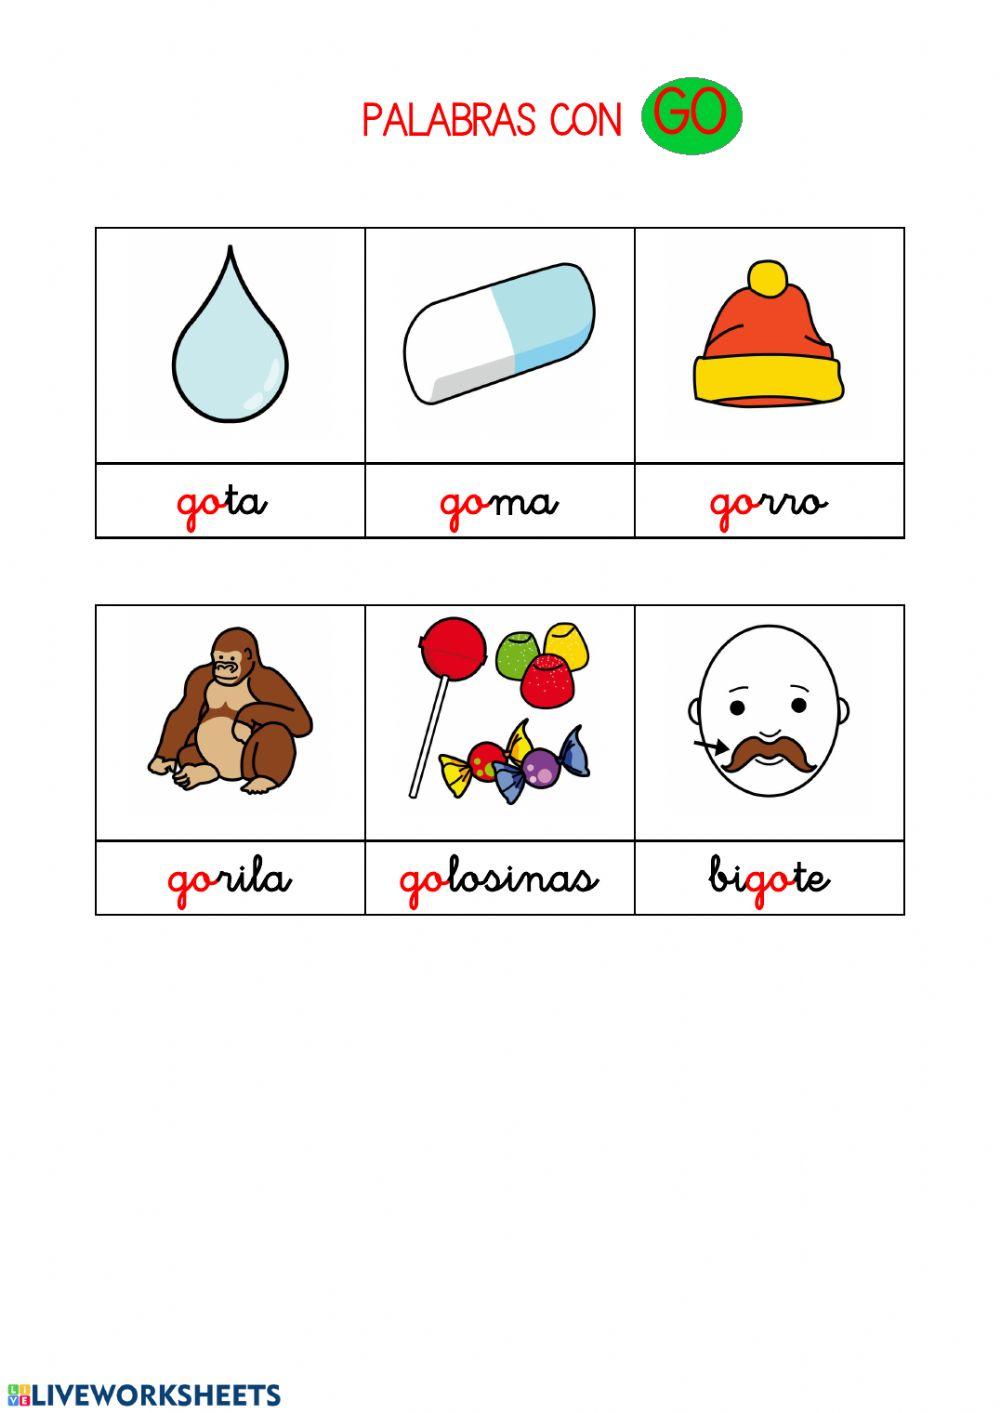 Palabras con G activity | Live Worksheets